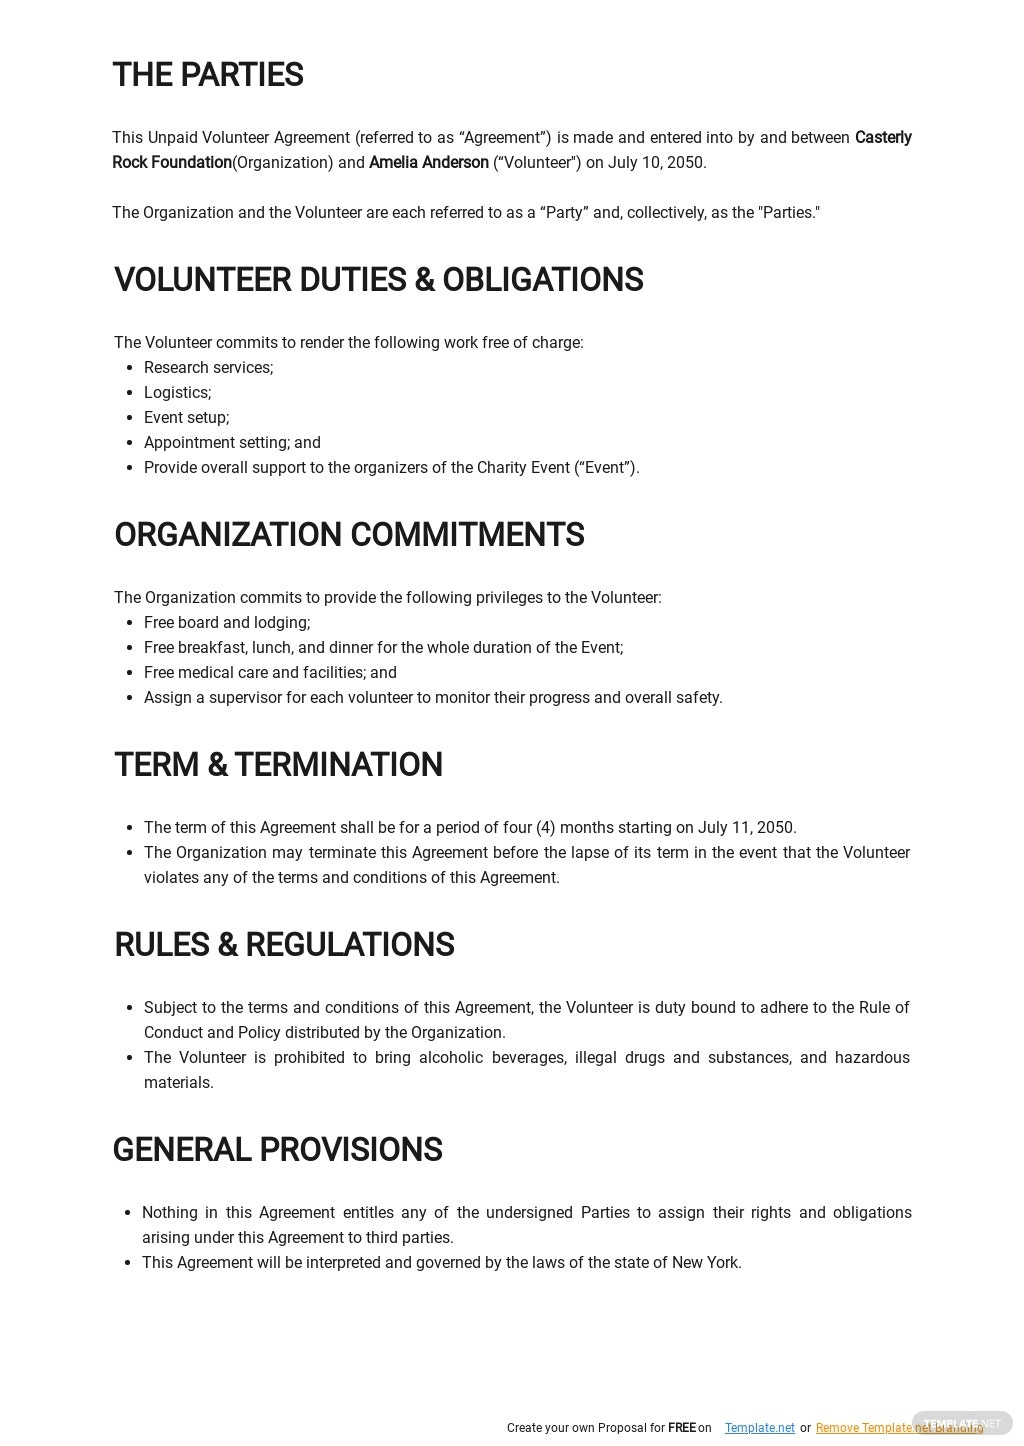 Unpaid Volunteer Agreement Template - Google Docs, Word | Template intended for Pet Photography Contract Template